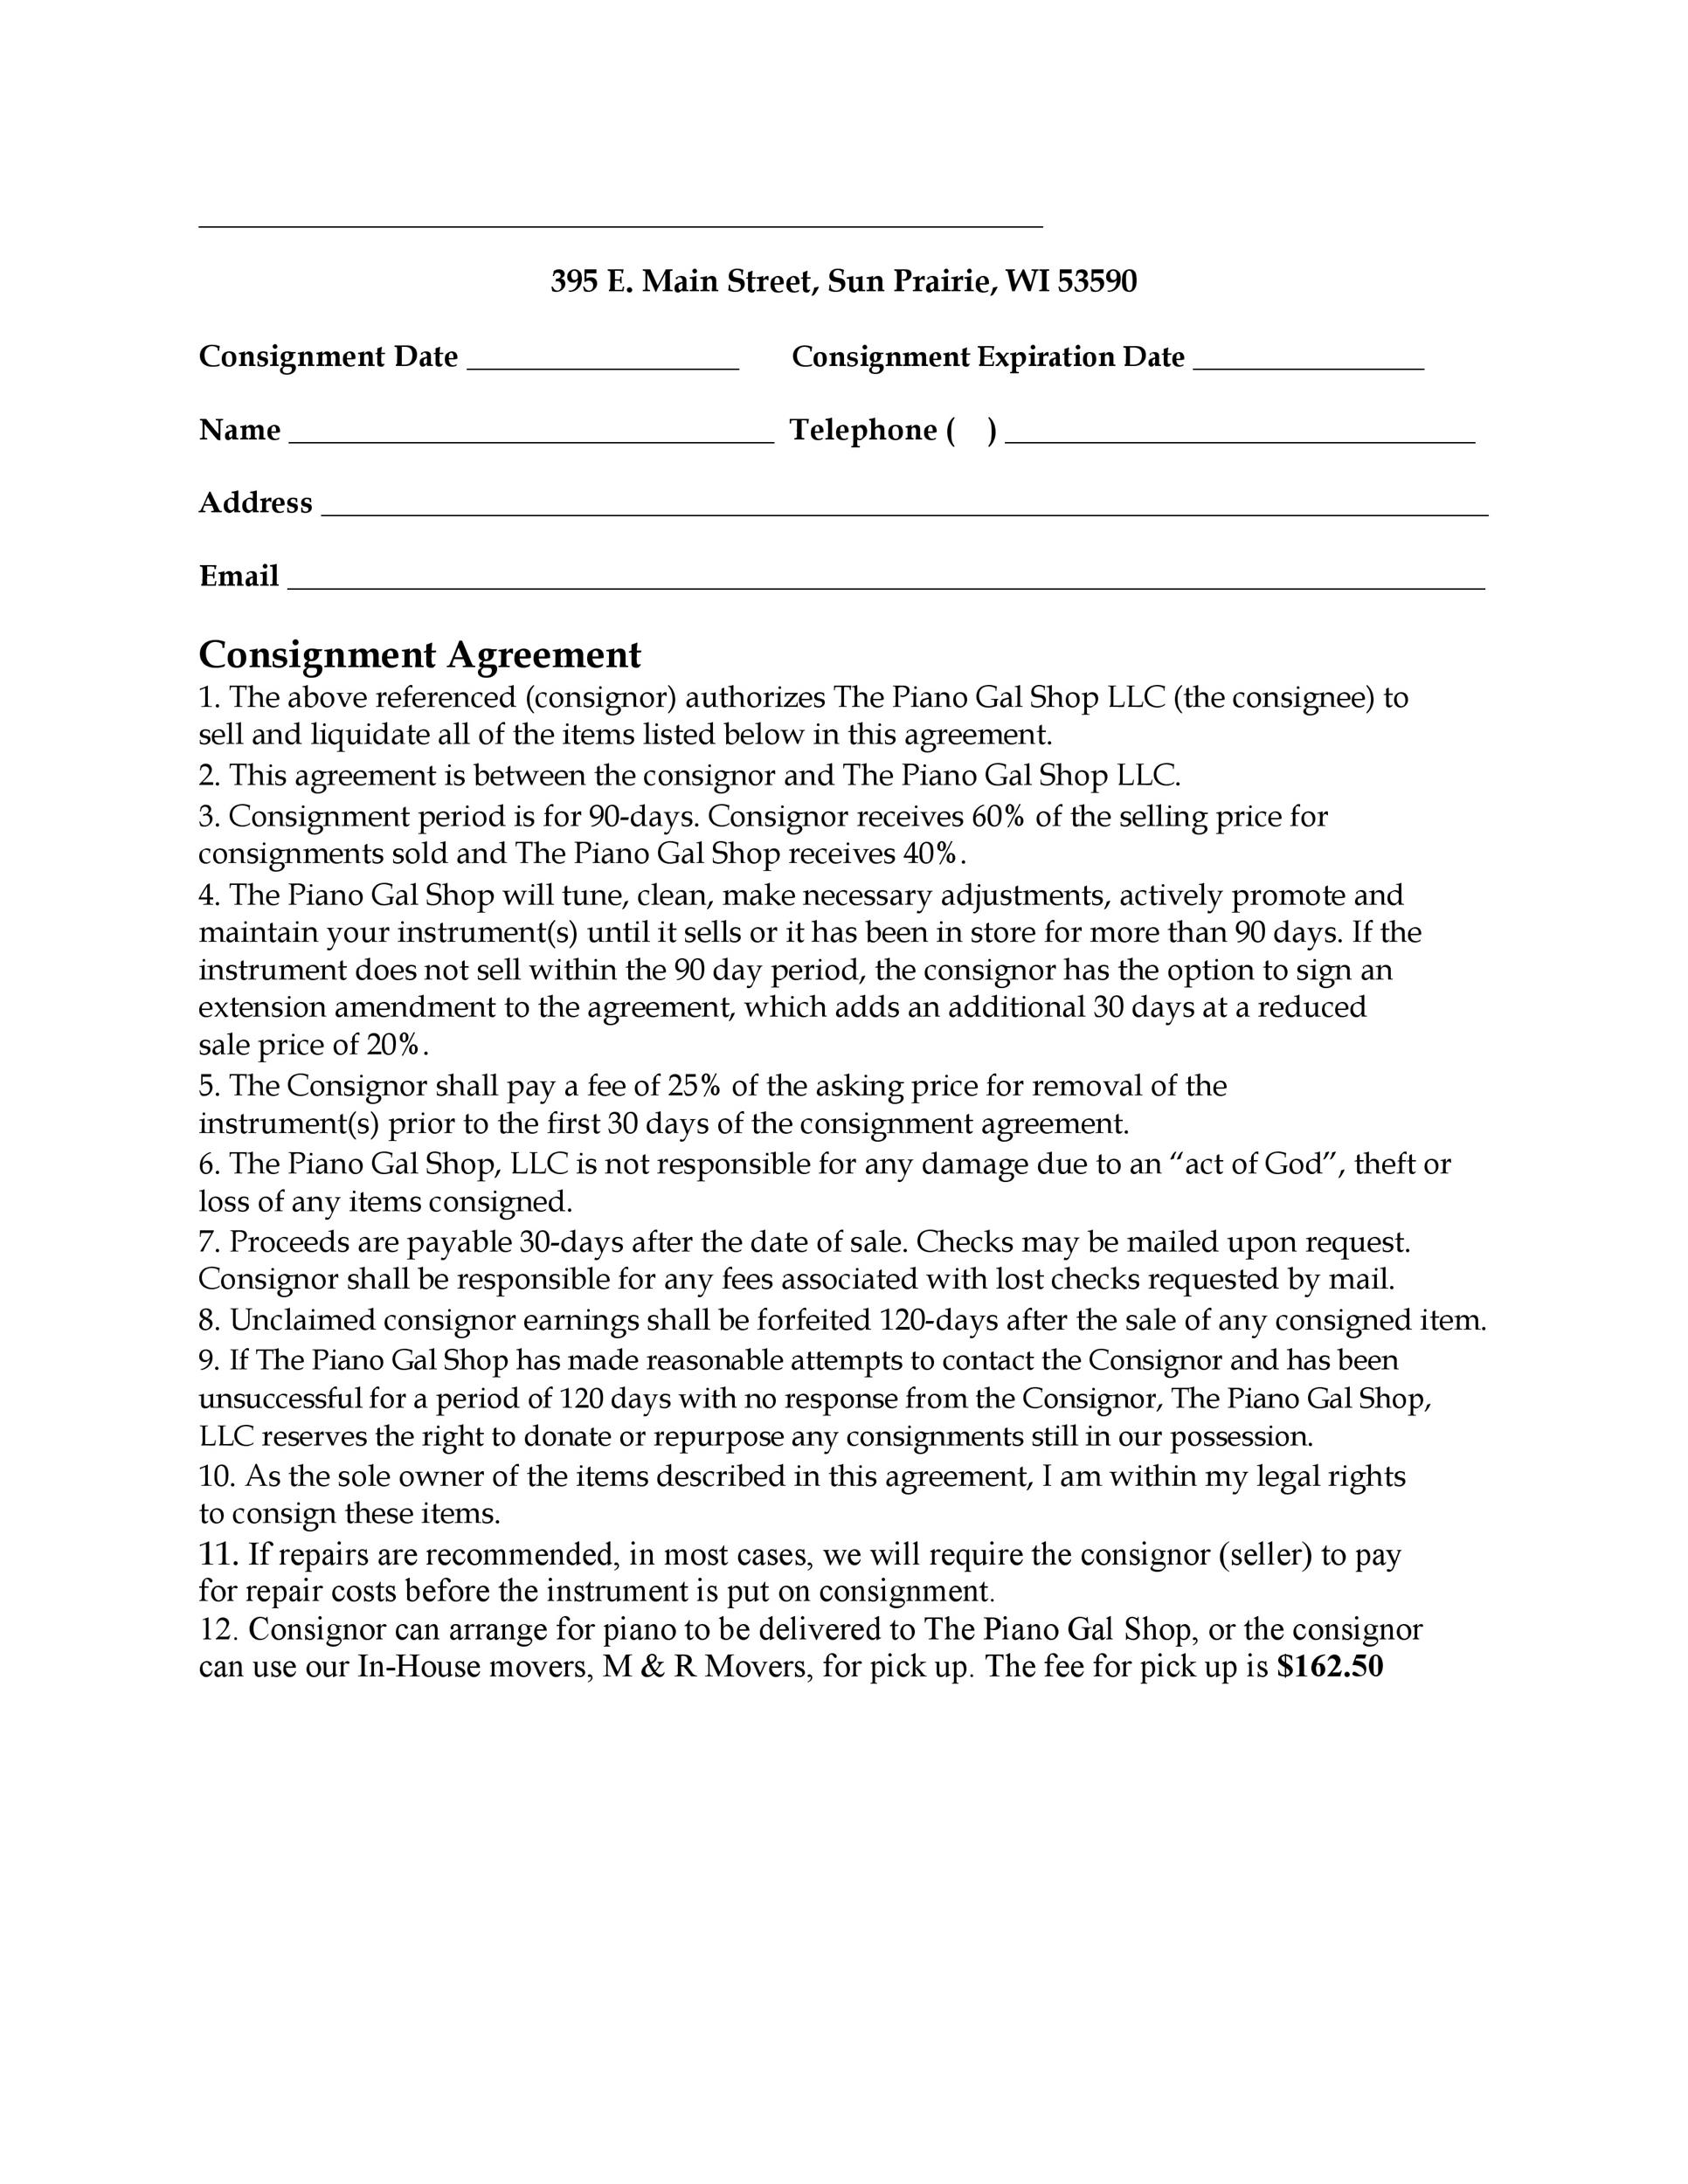 Free Consignment Agreement Template 12